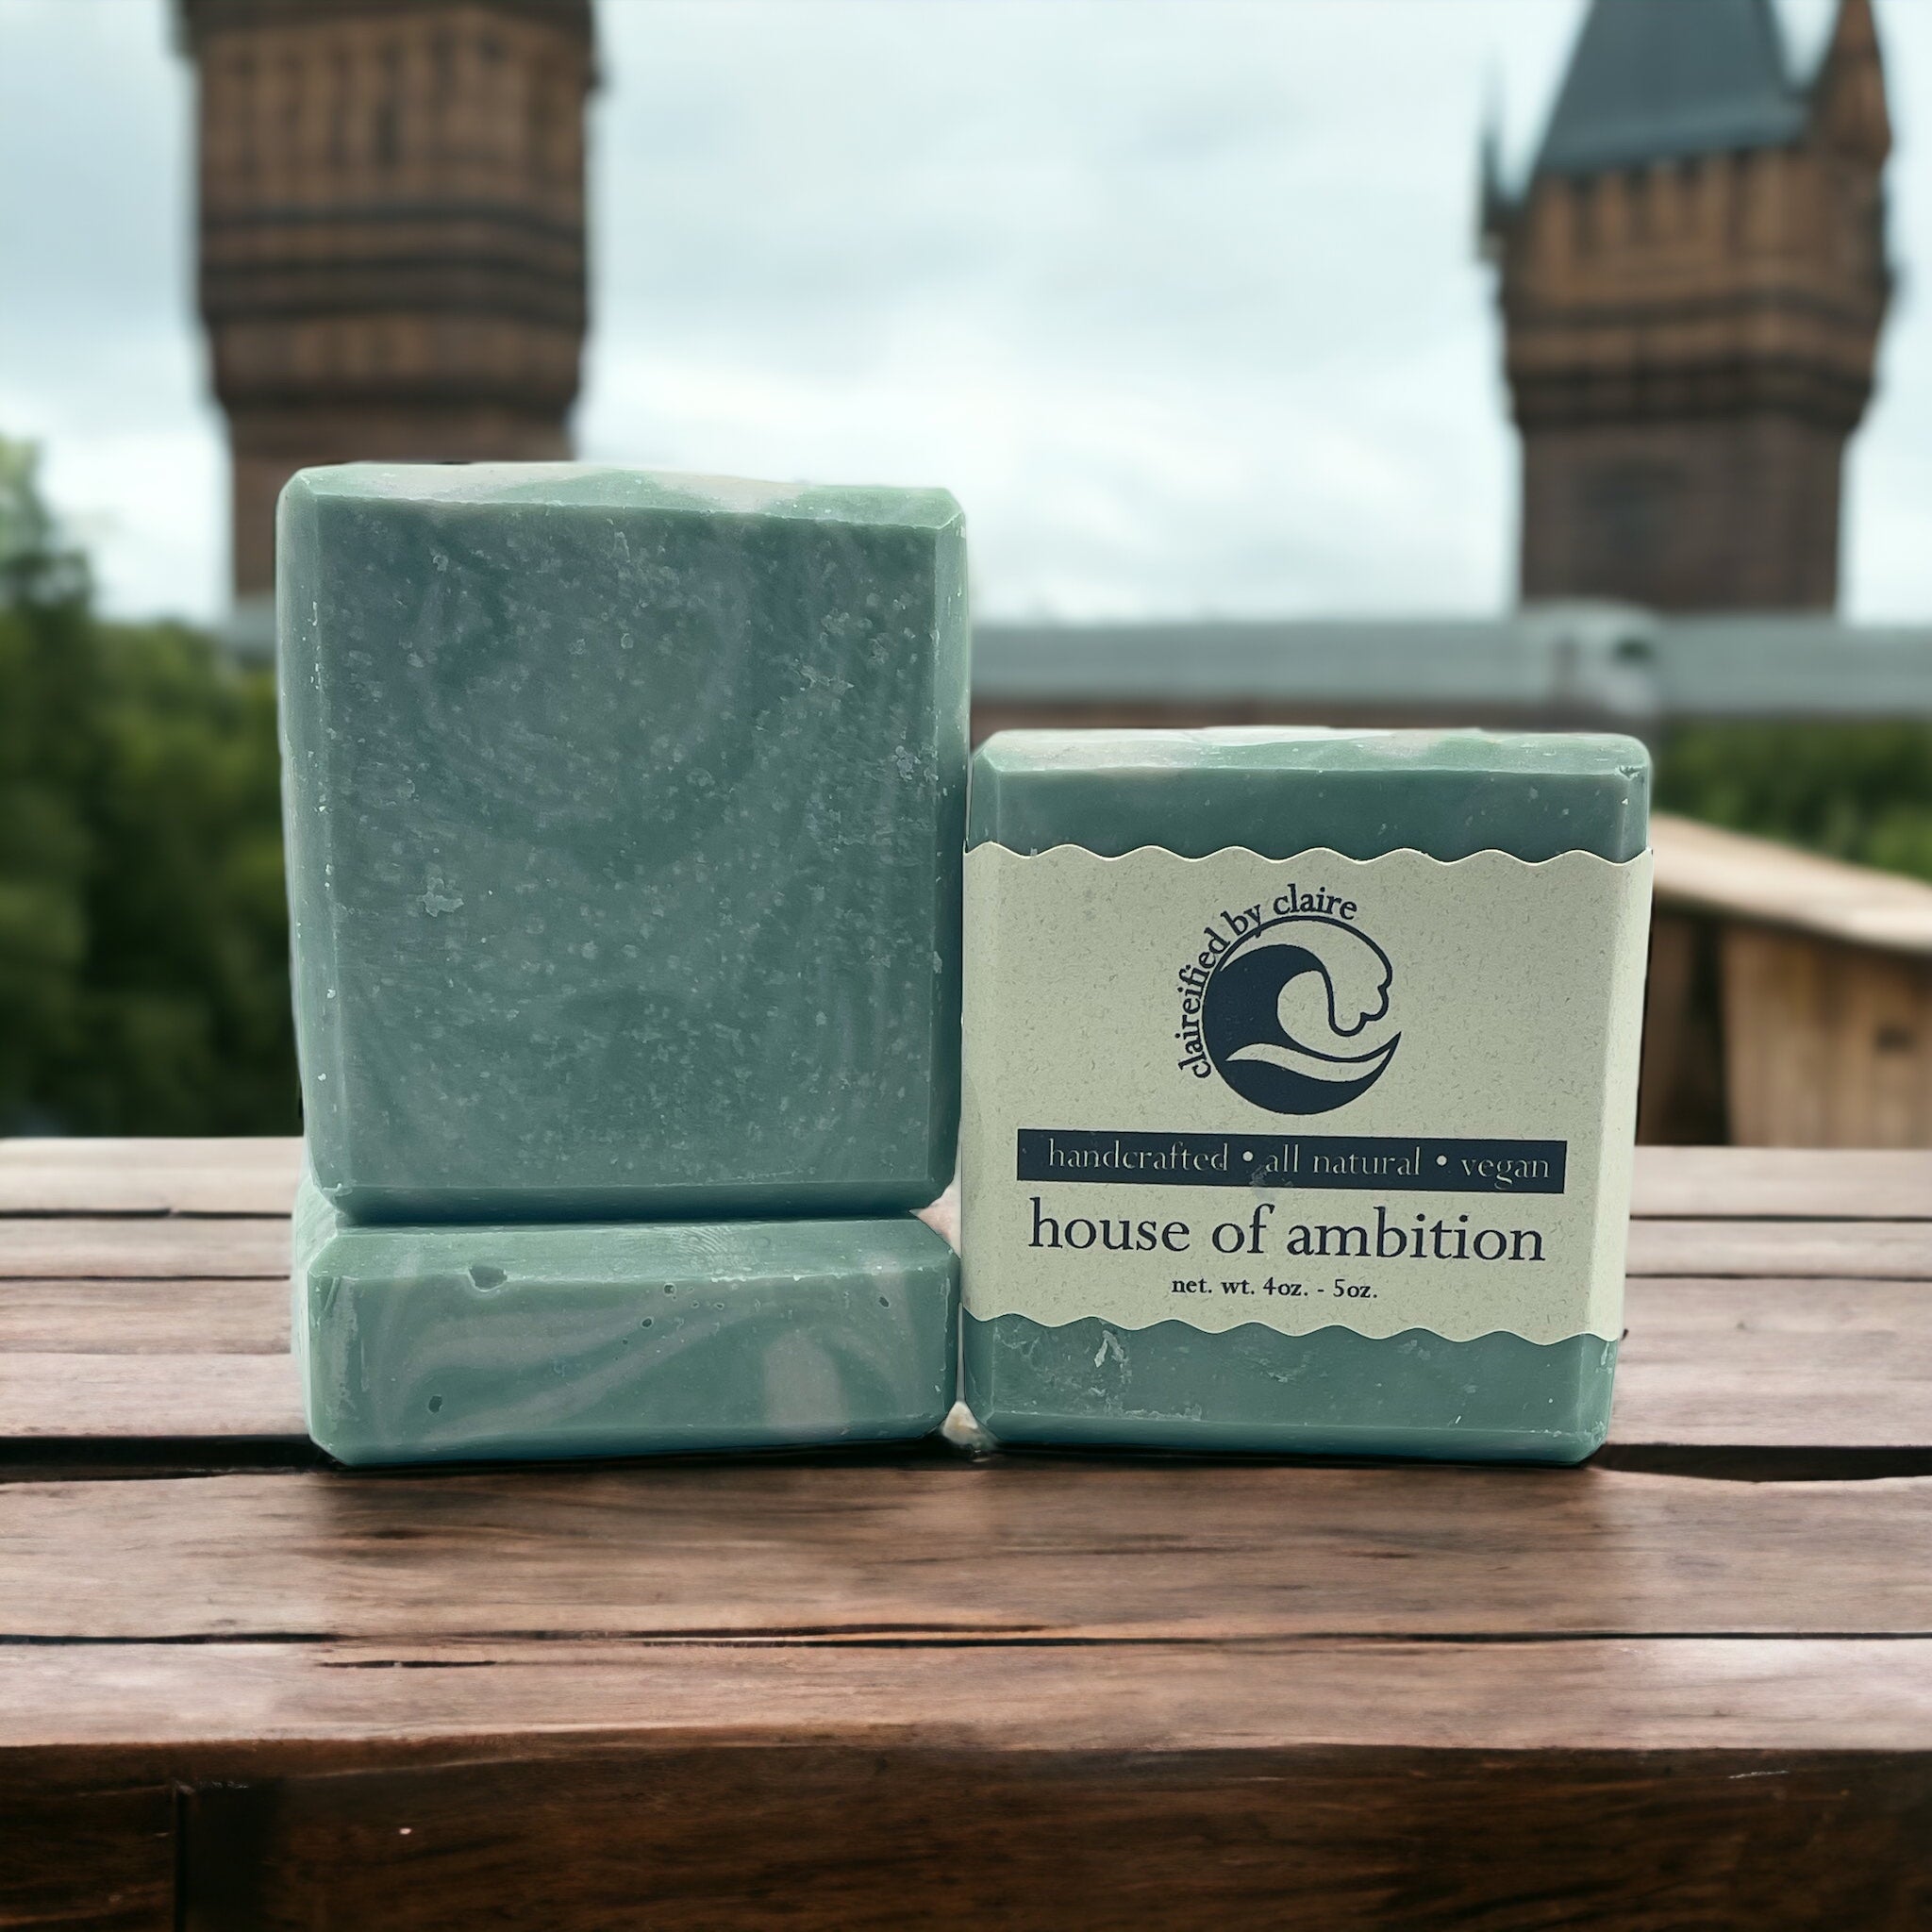 House of Ambition handmade soap inspired by Slytherin house from Harry Potter-1